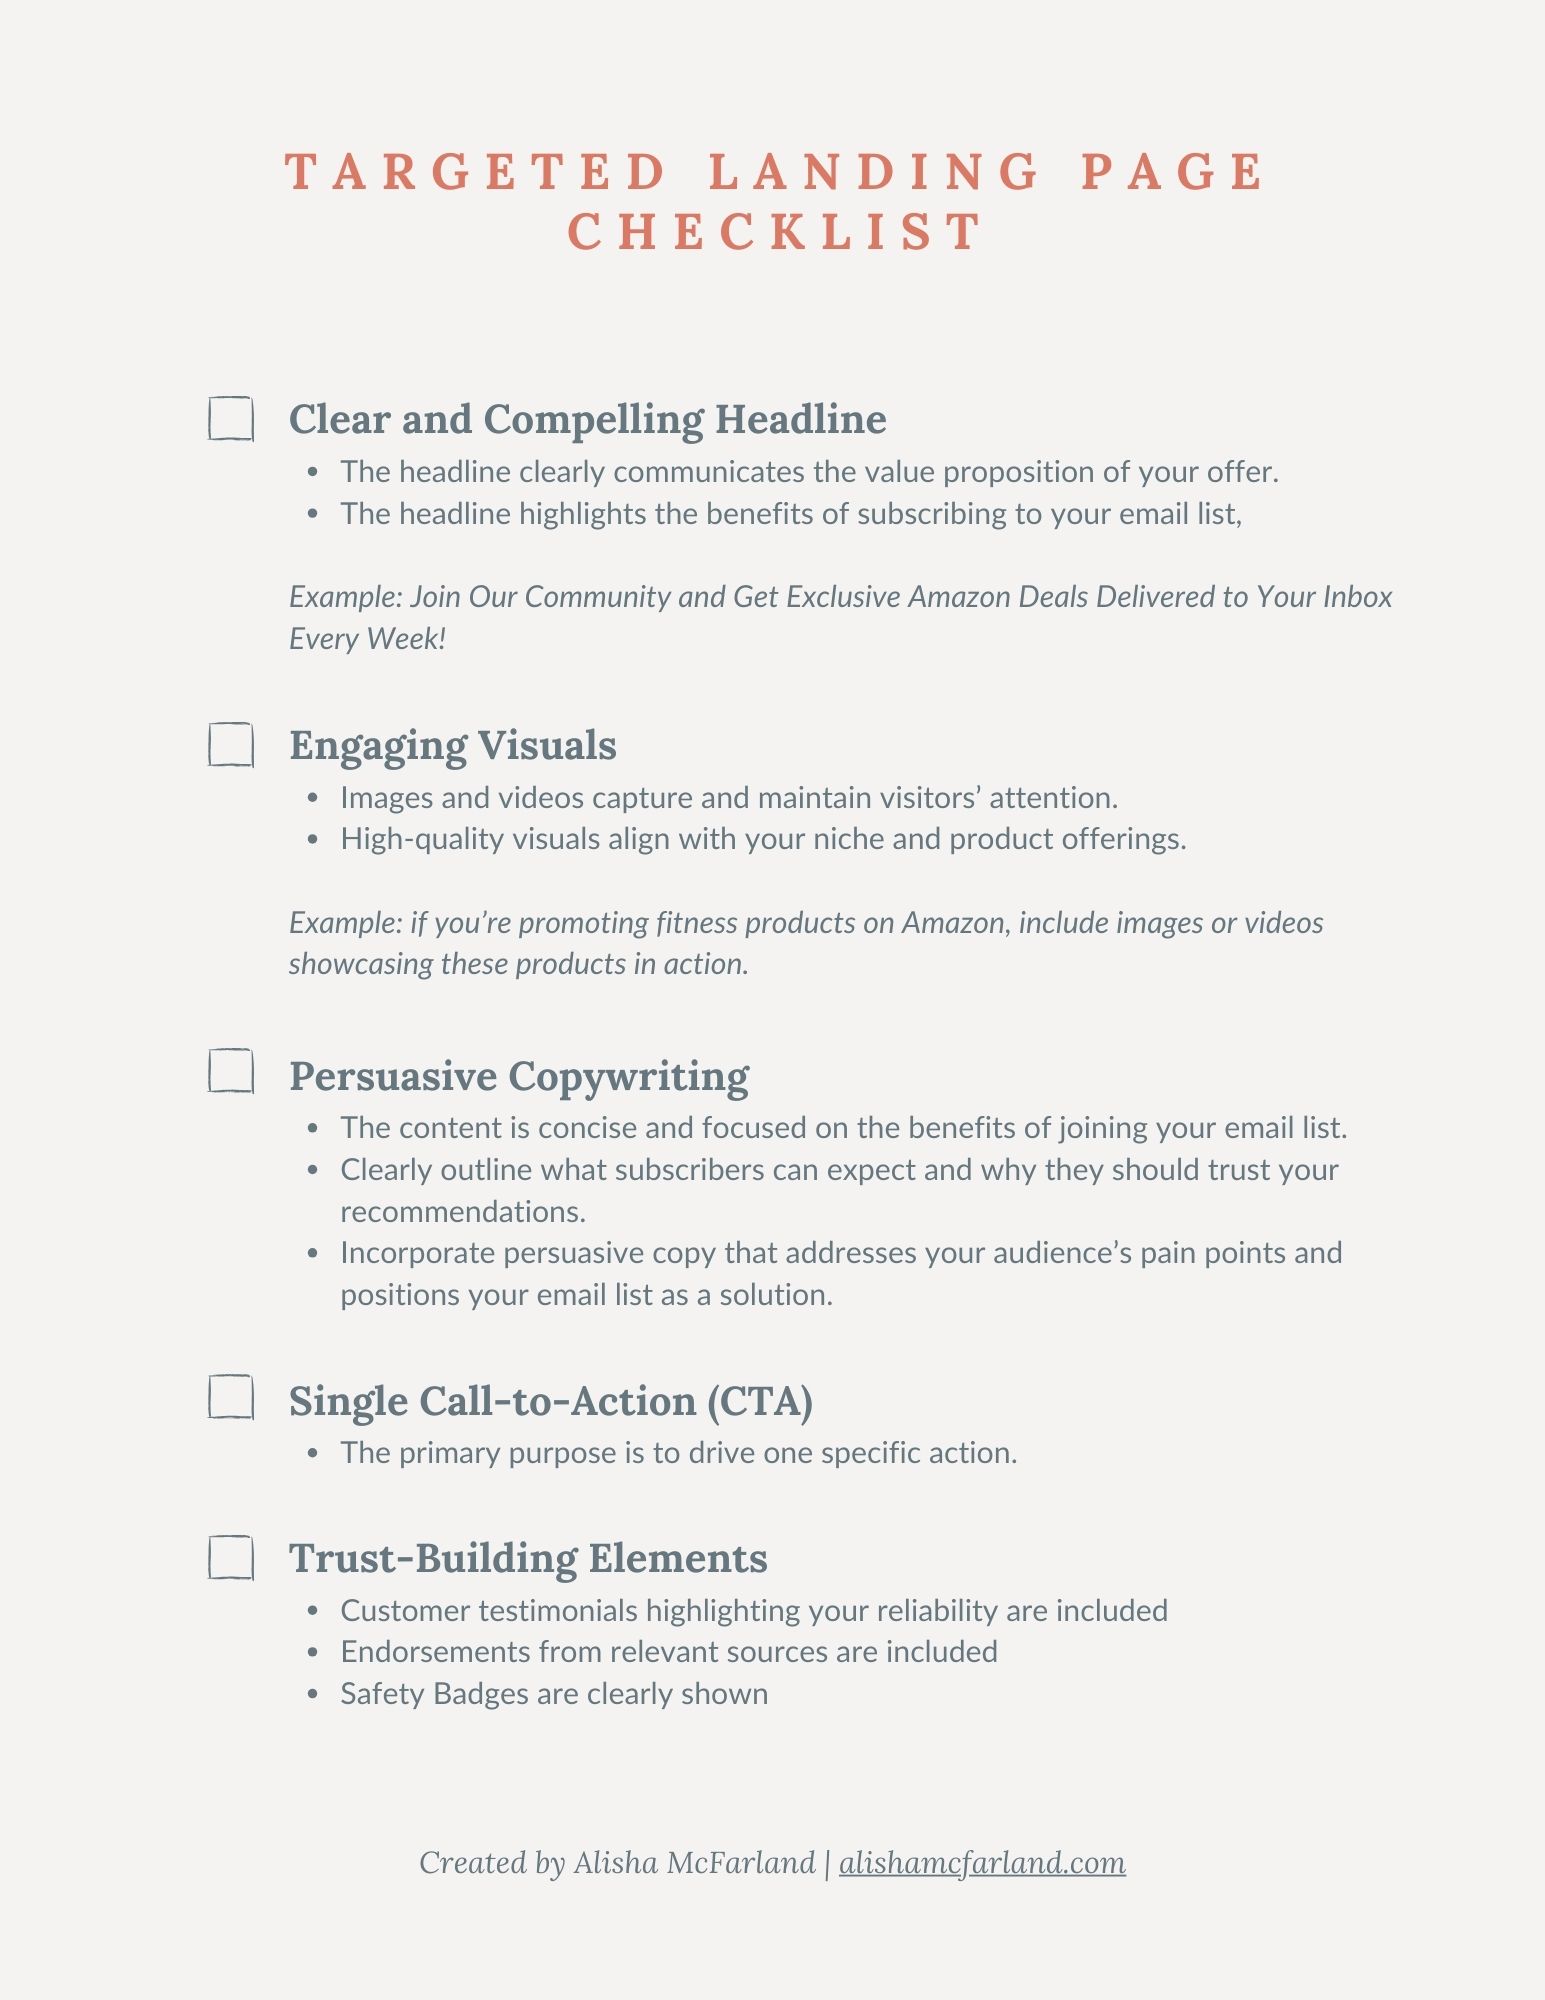 Targeted Landing Page Checklist